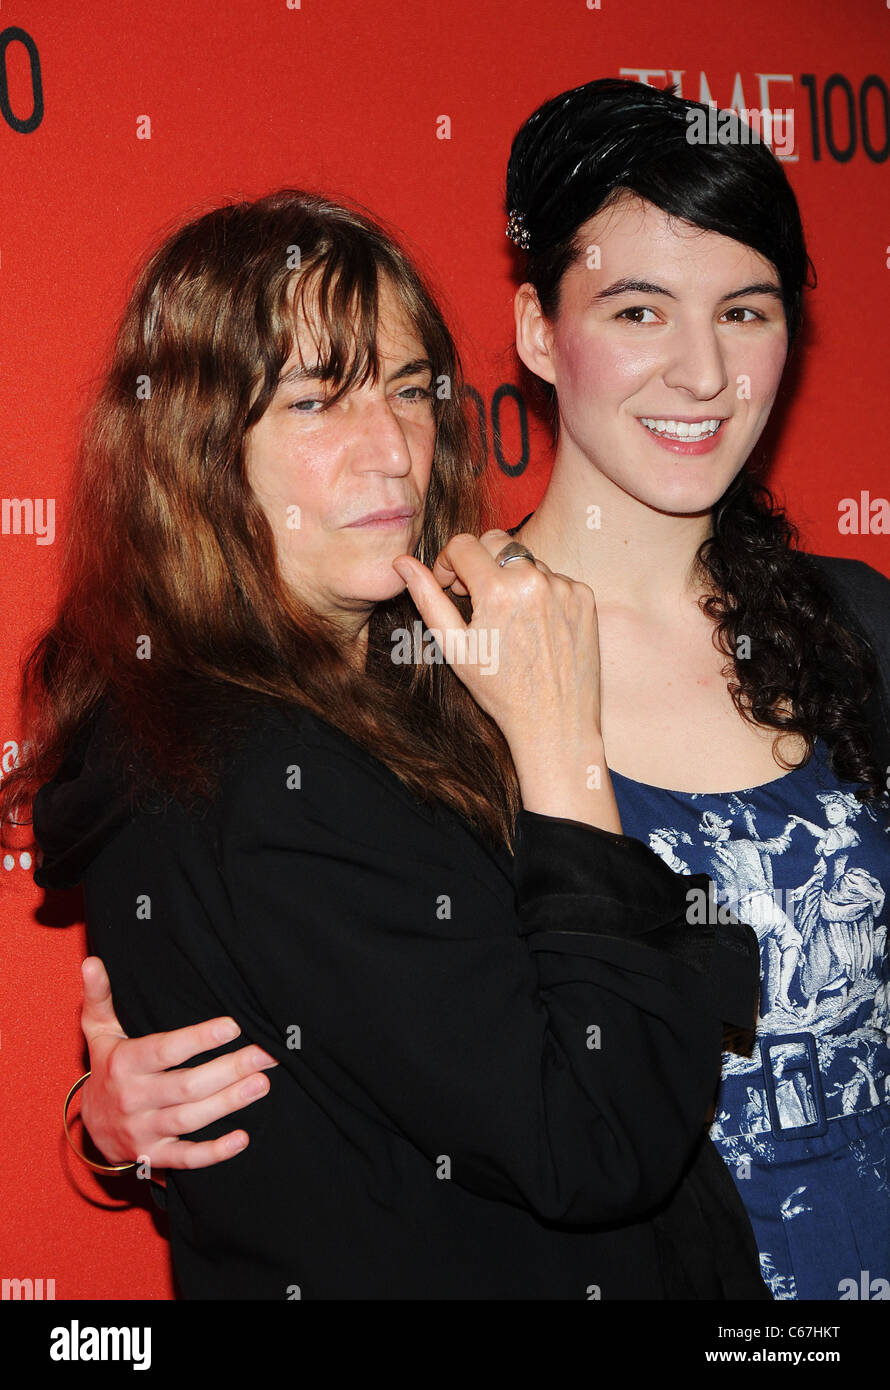 Patti Smith, Jessica Smith at arrivals for TIME 100 GALA, Frederick P. Rose Hall - Jazz at Lincoln Center, New York, NY April 26, 2011. Photo By: Desiree Navarro/Everett Collection Stock Photo